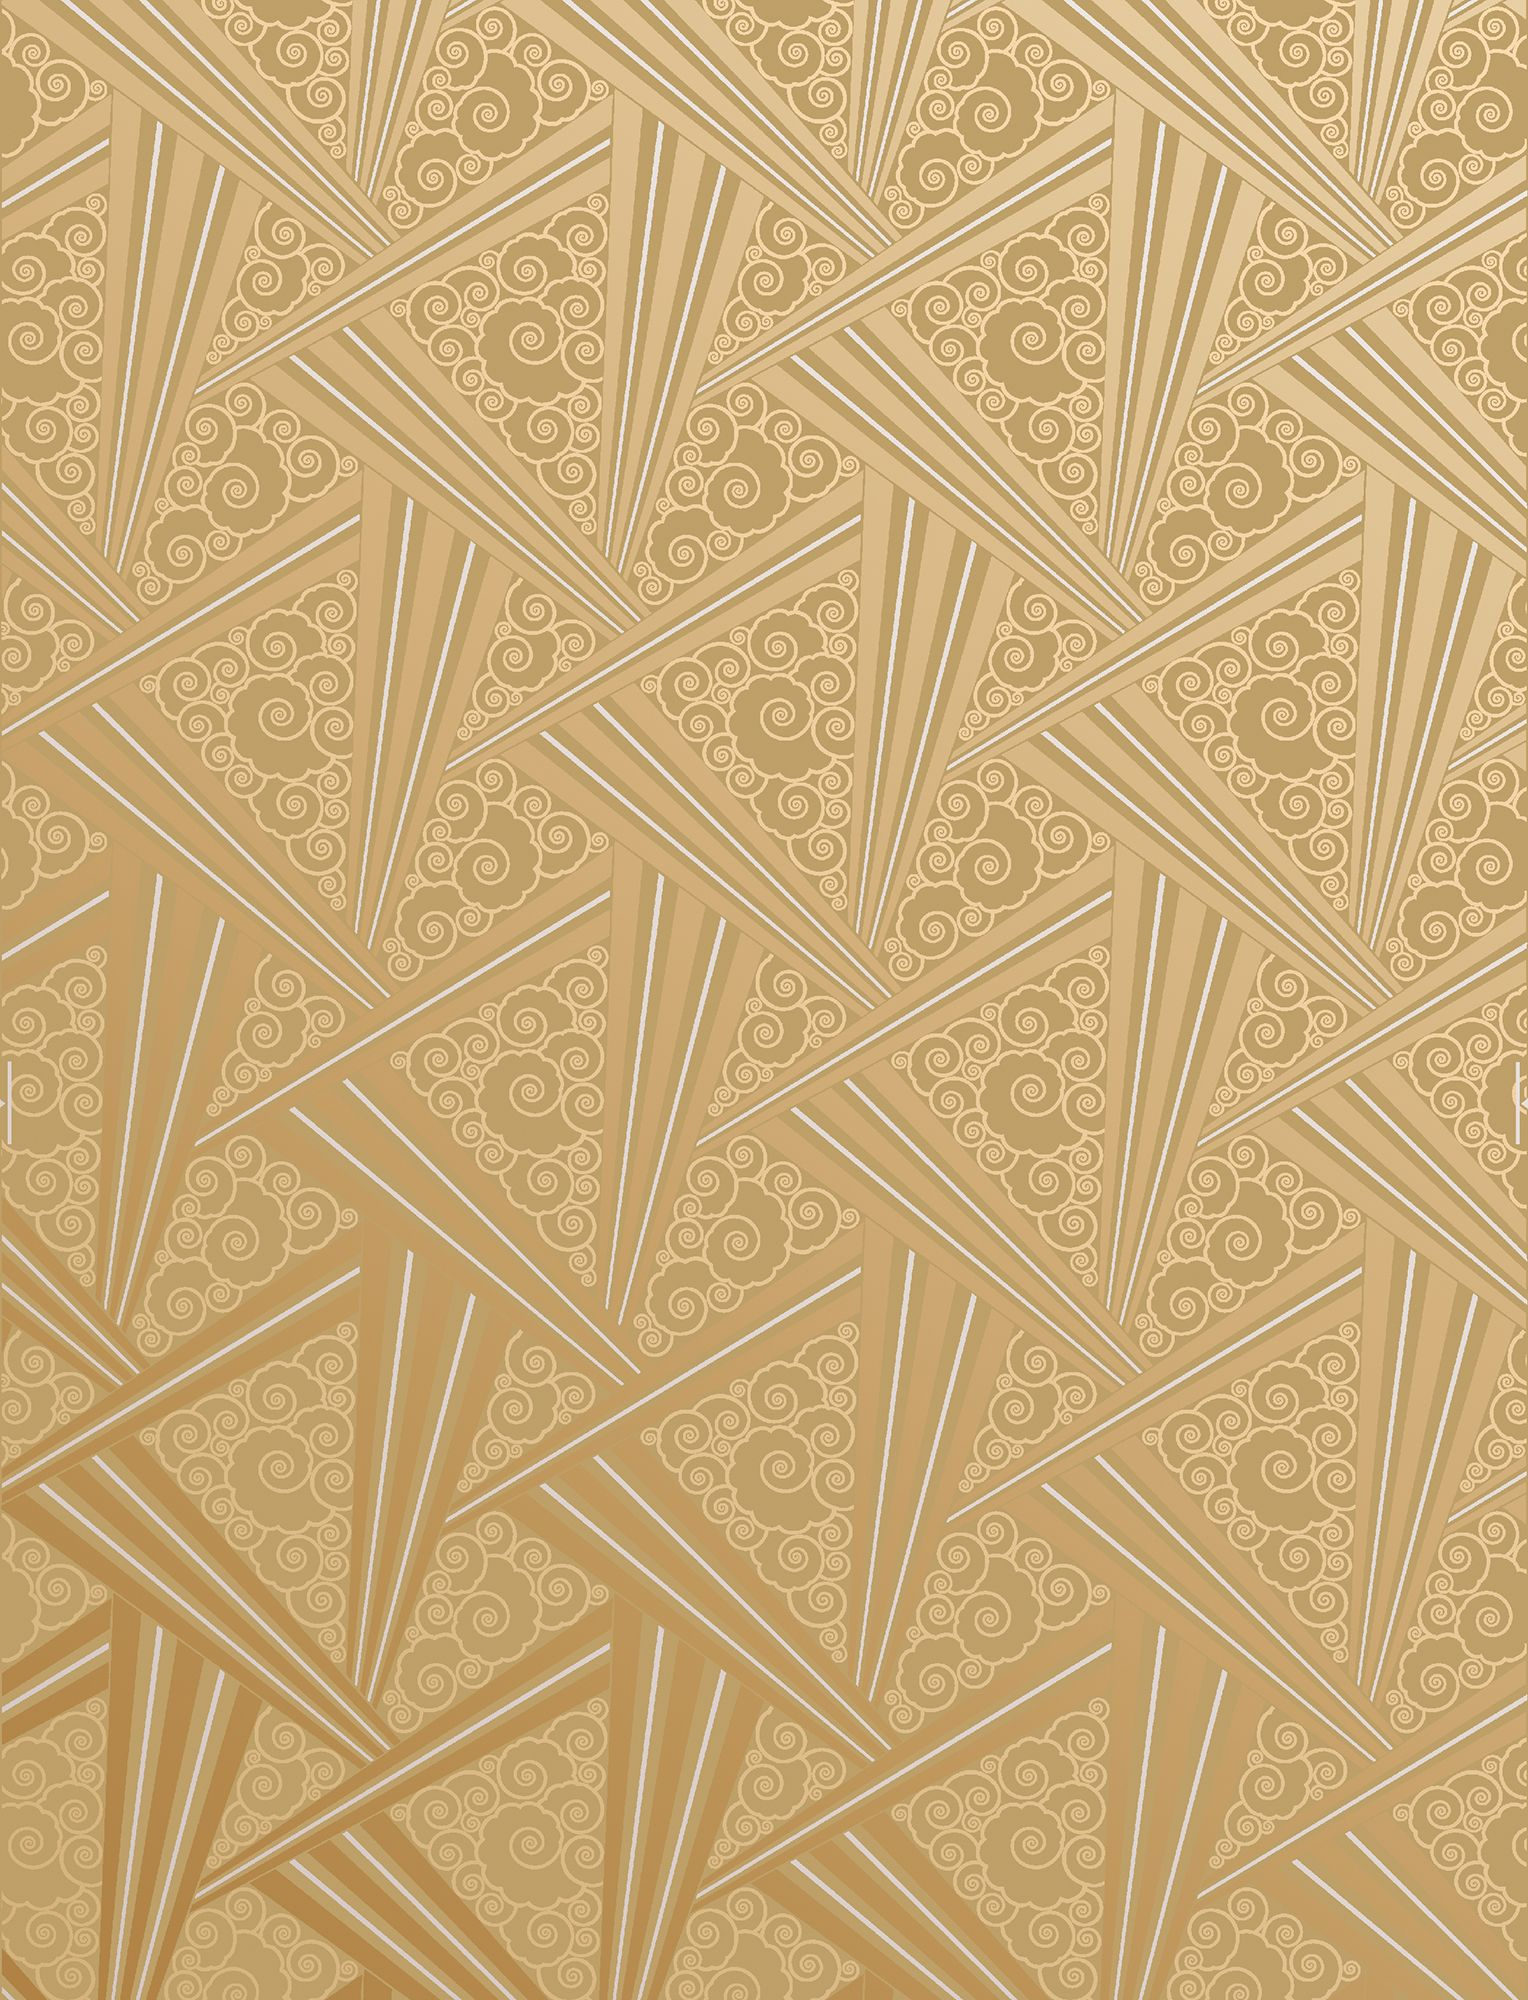 1528x2000 18 Art Deco Wallpaper Ideas Decorating with 1920s Art Deco Wall Coverings